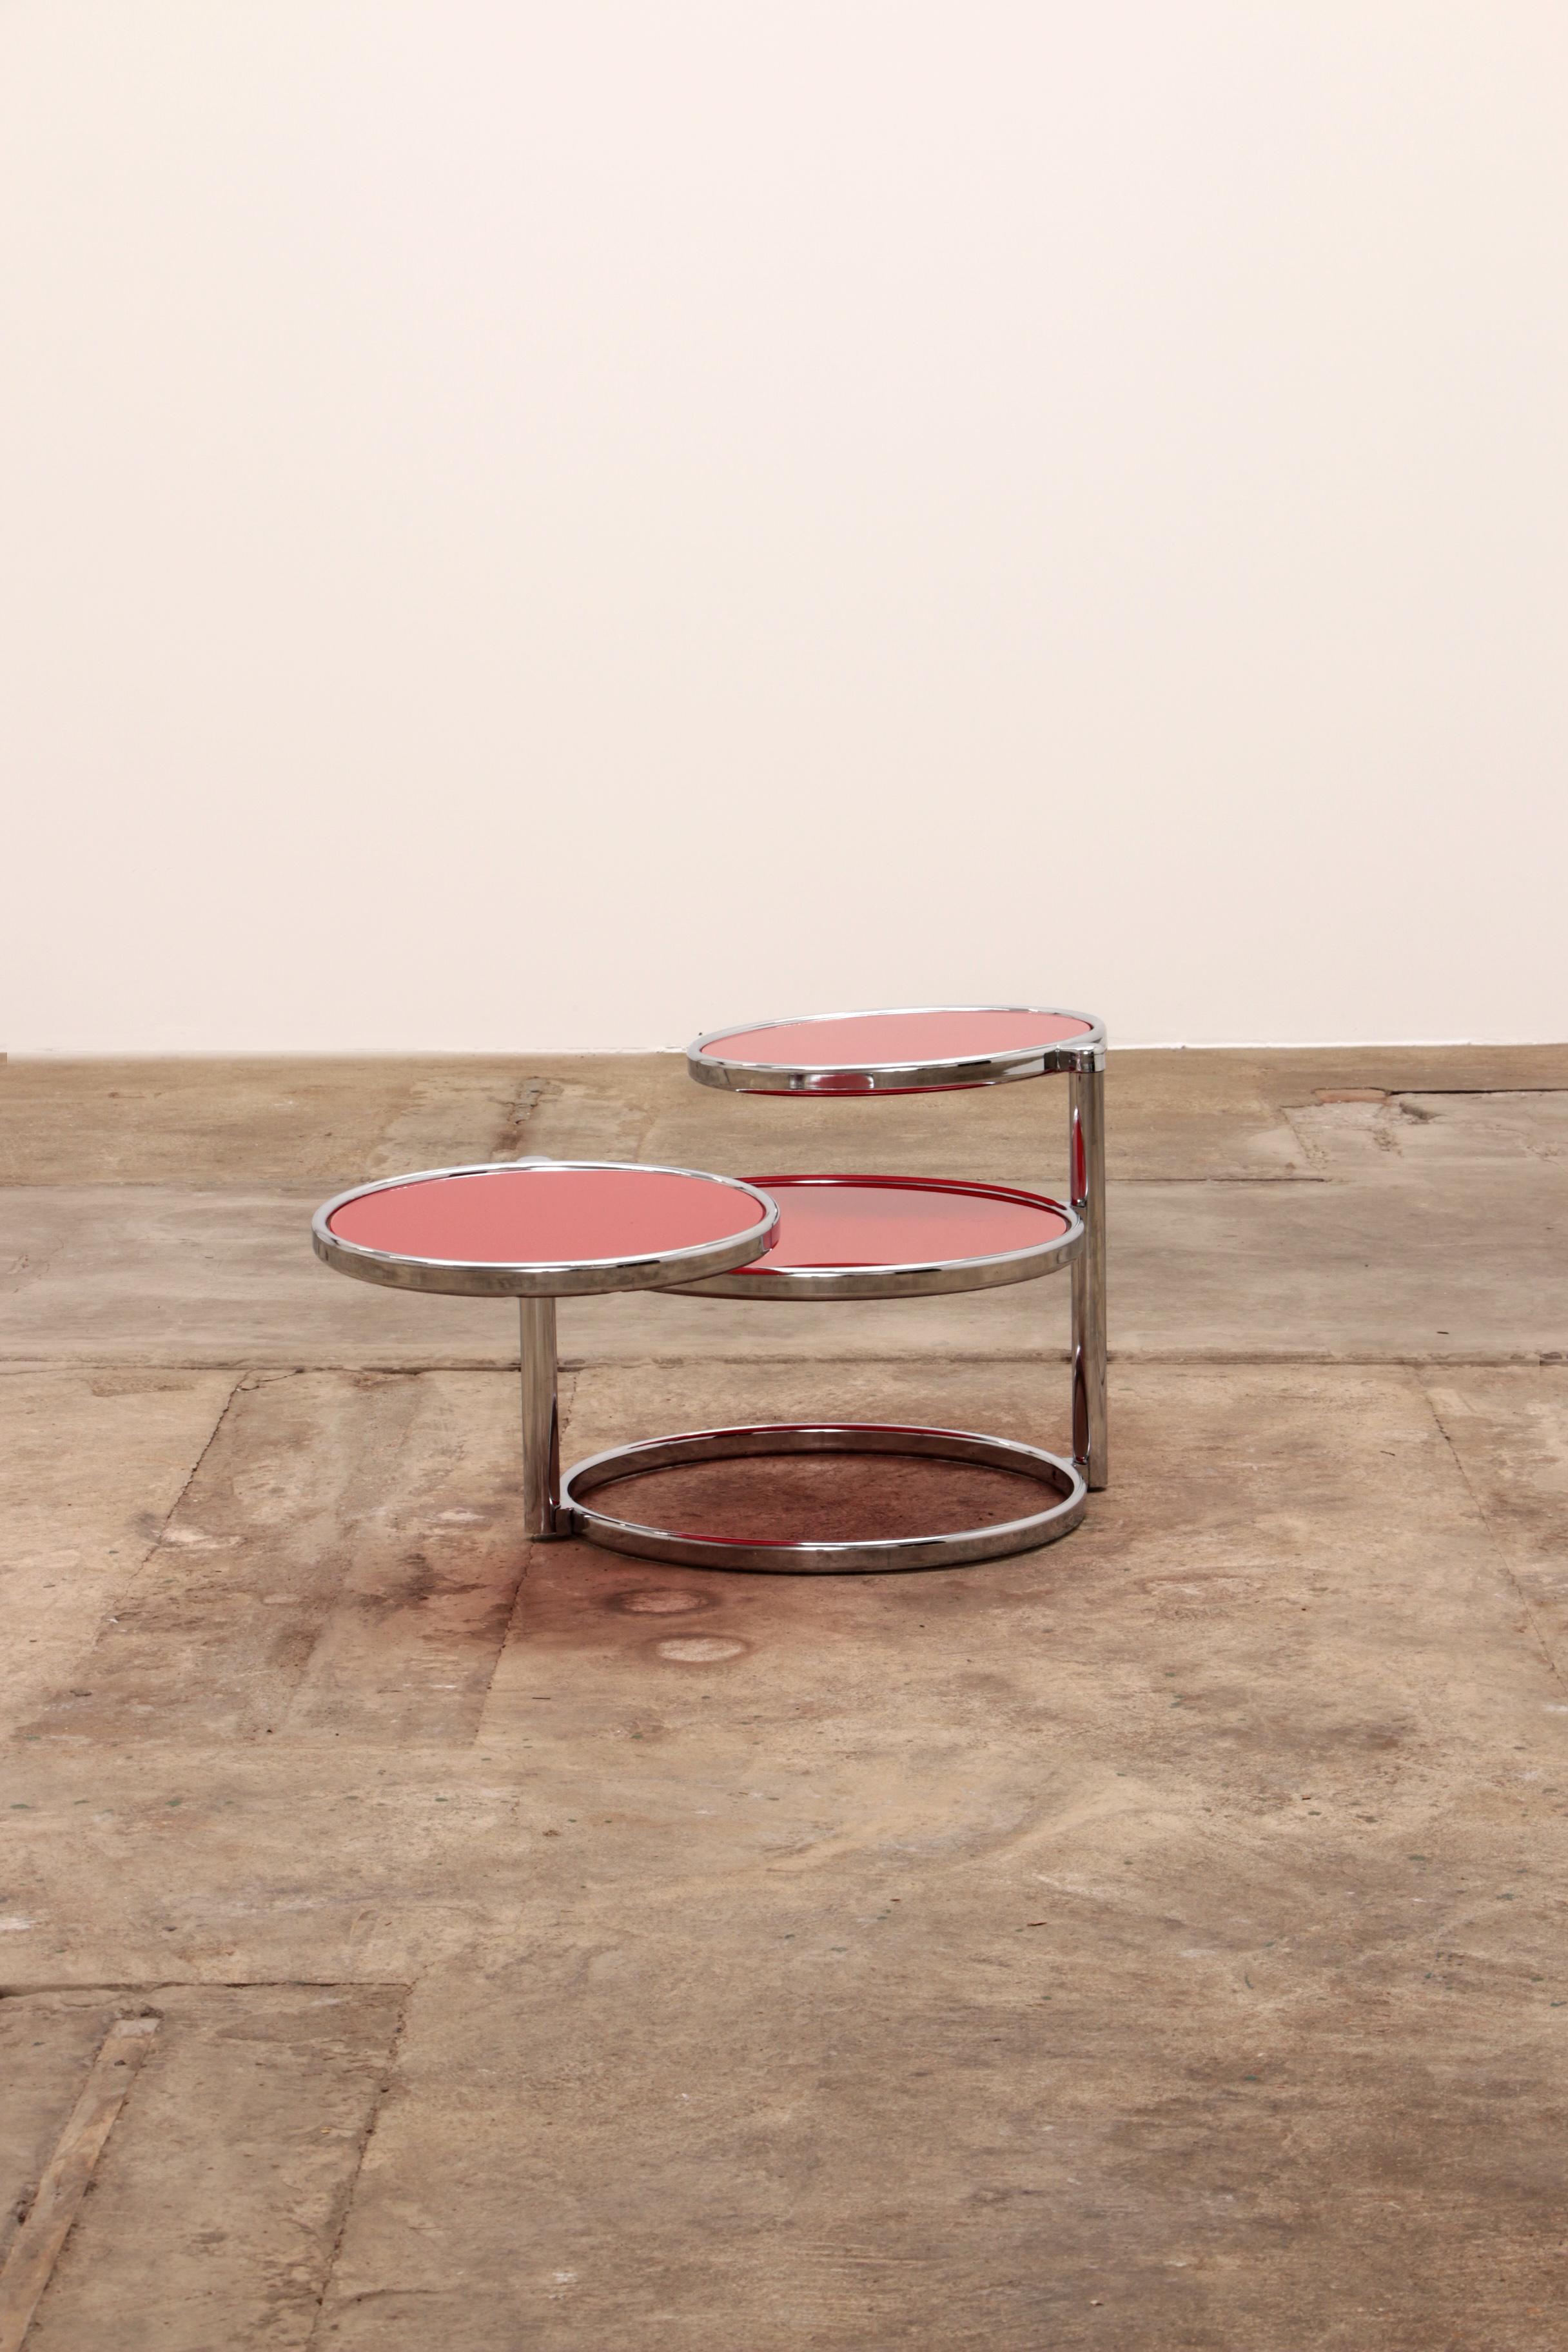 Nice chrome coffee table with two rotating tables.

If you don't have much space, you can fold out the table and you have more table. The red glass plates have signs of use.

Sustainable: environmentally conscious By supplementing your interior